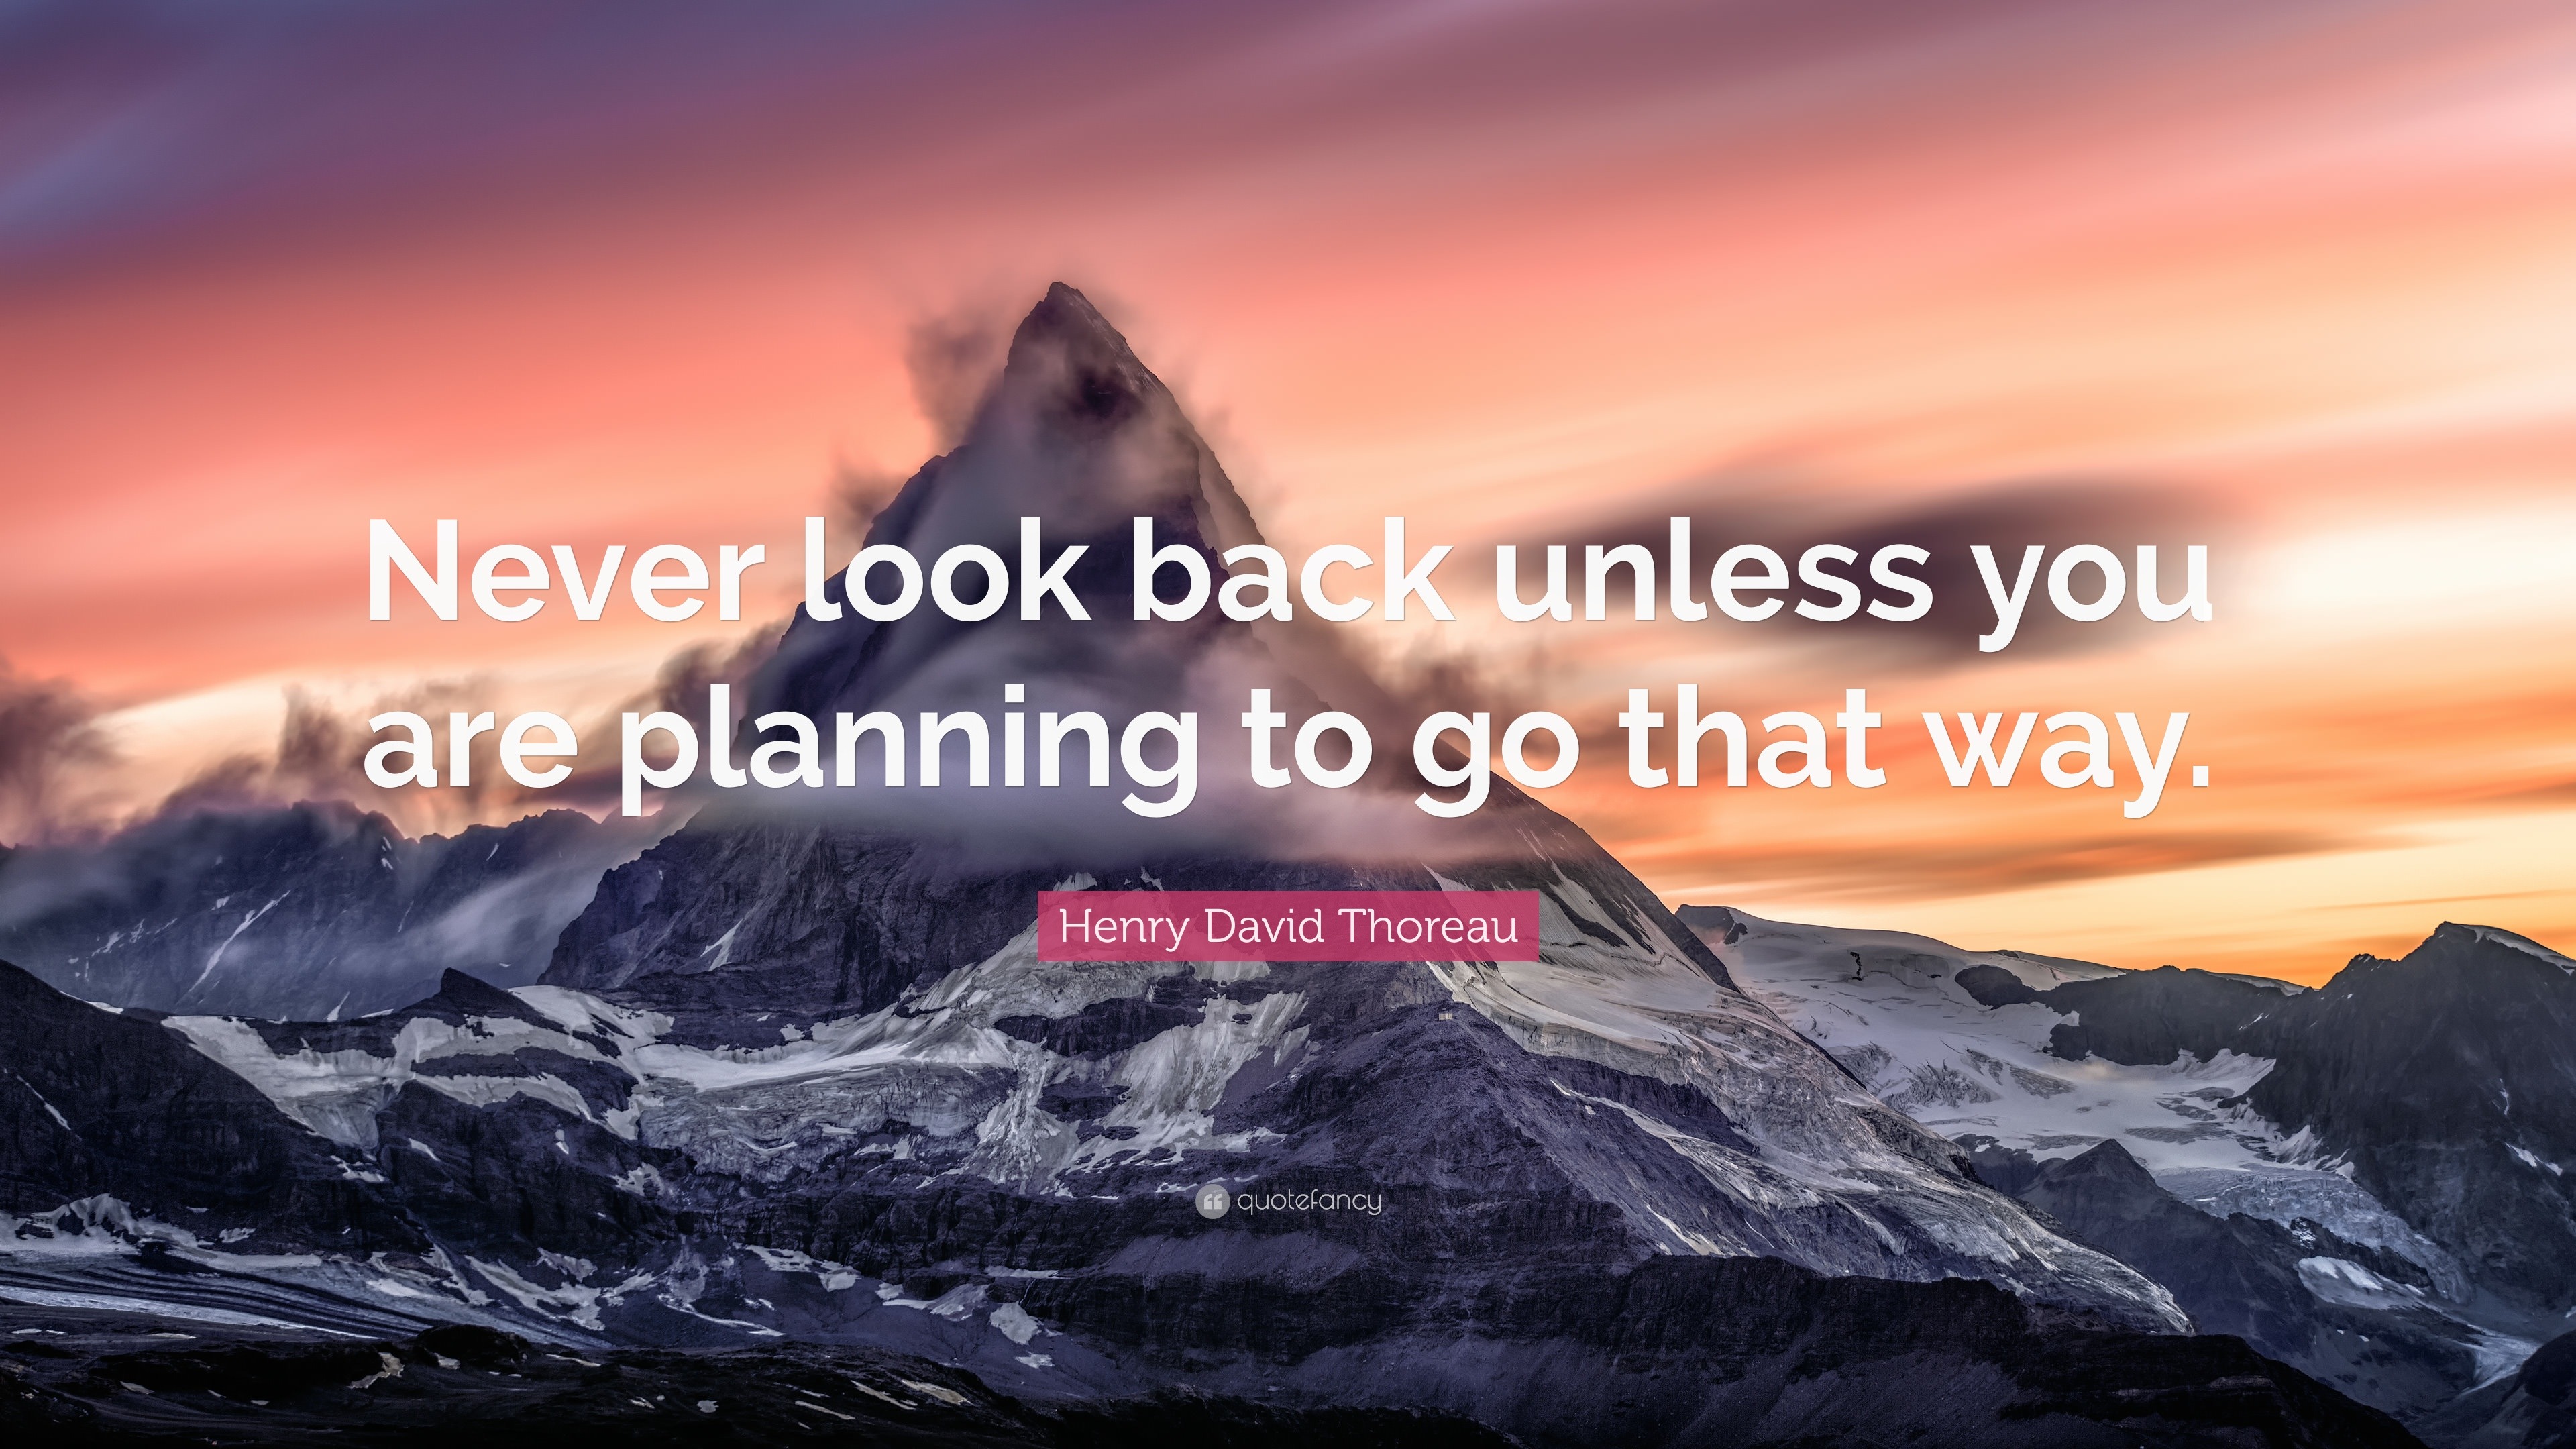 Henry David Thoreau Quote: “Never look back unless you are planning to